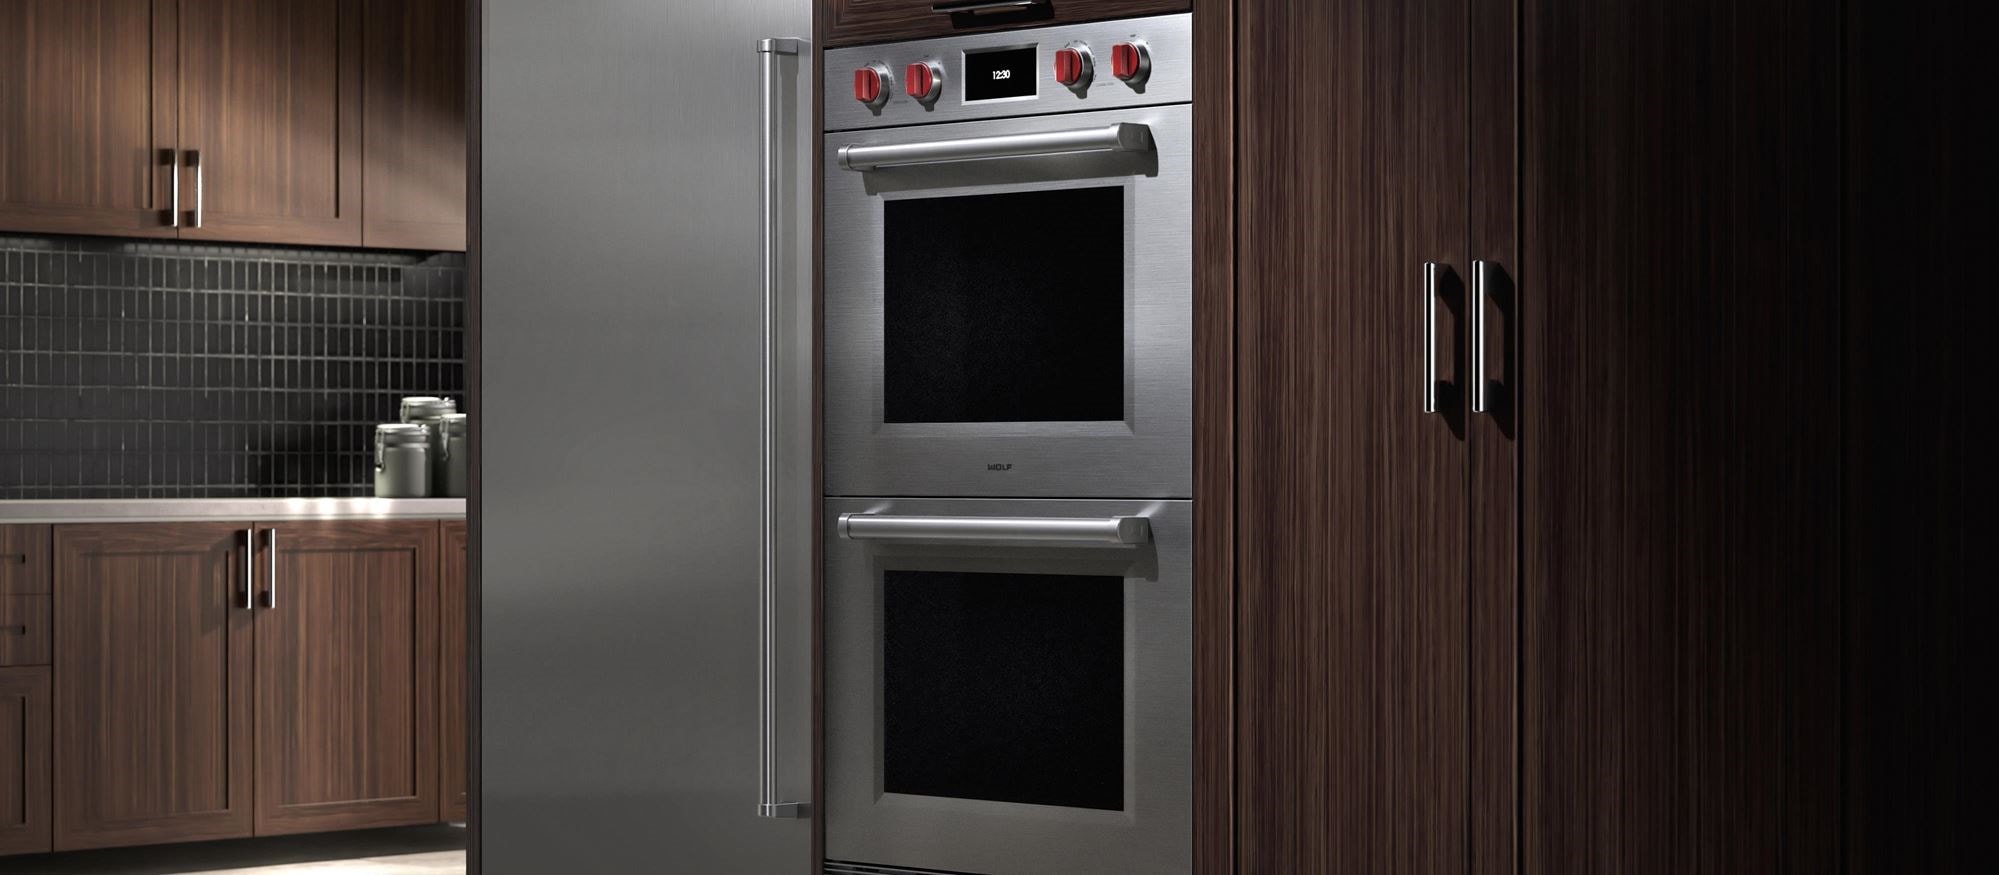 Commercial Grade Stainless Steel Oven Design Ideas